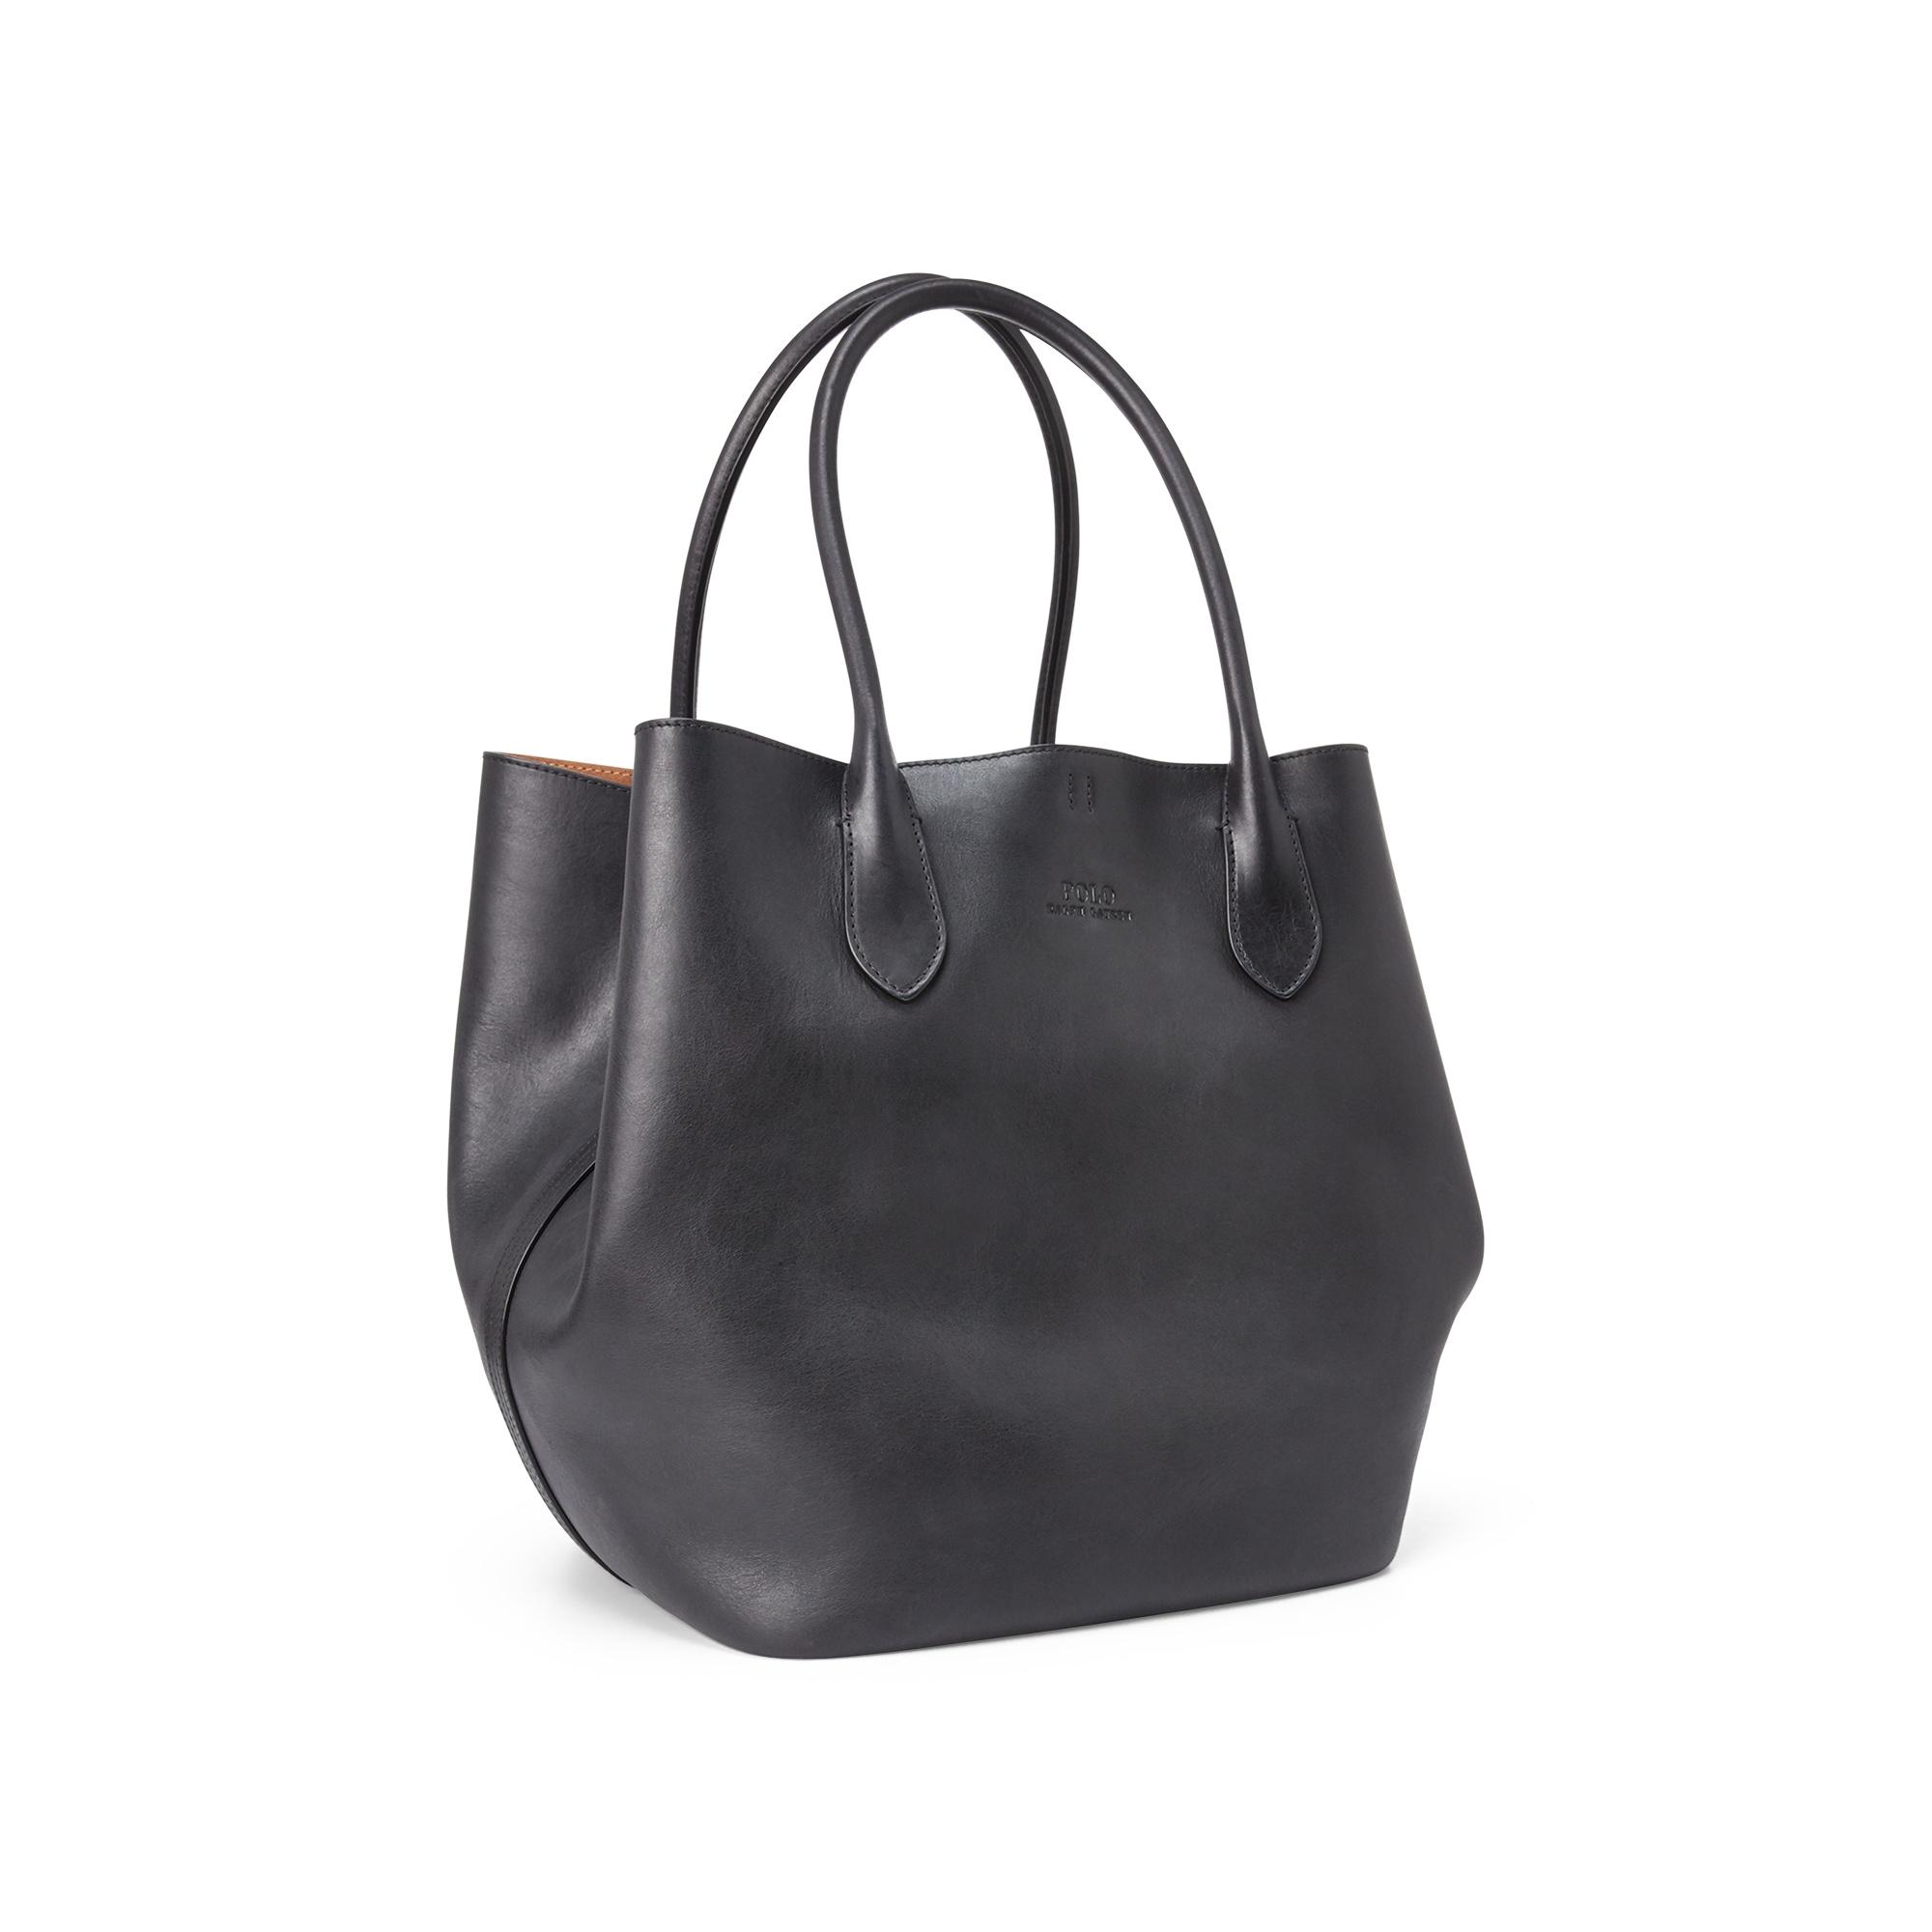 Polo Ralph Lauren Leather Large Bellport Tote in Black - Lyst